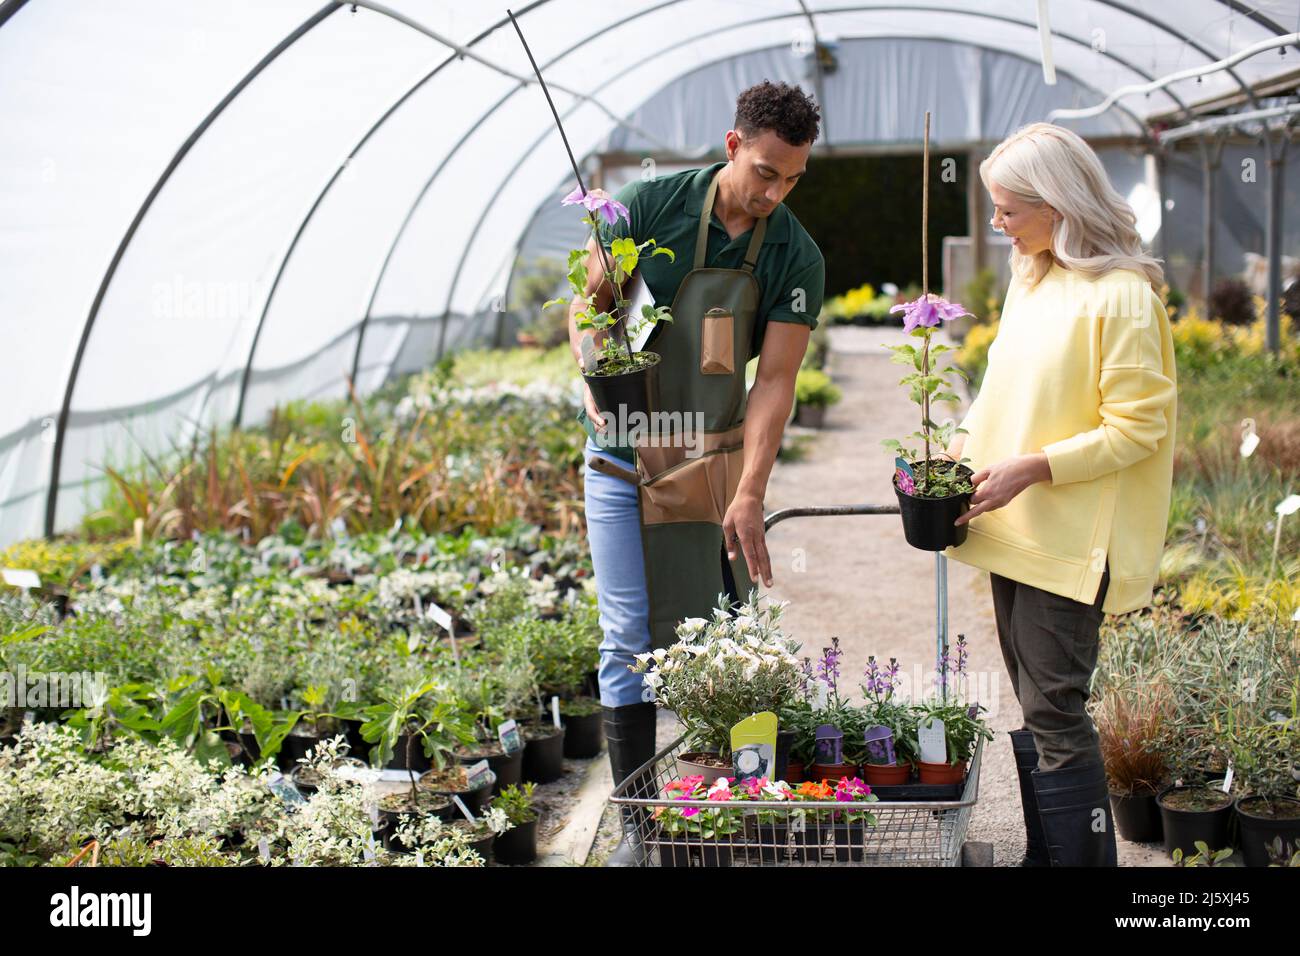 Garden shop worker helping customer with potted flowers in greenhouse Stock Photo